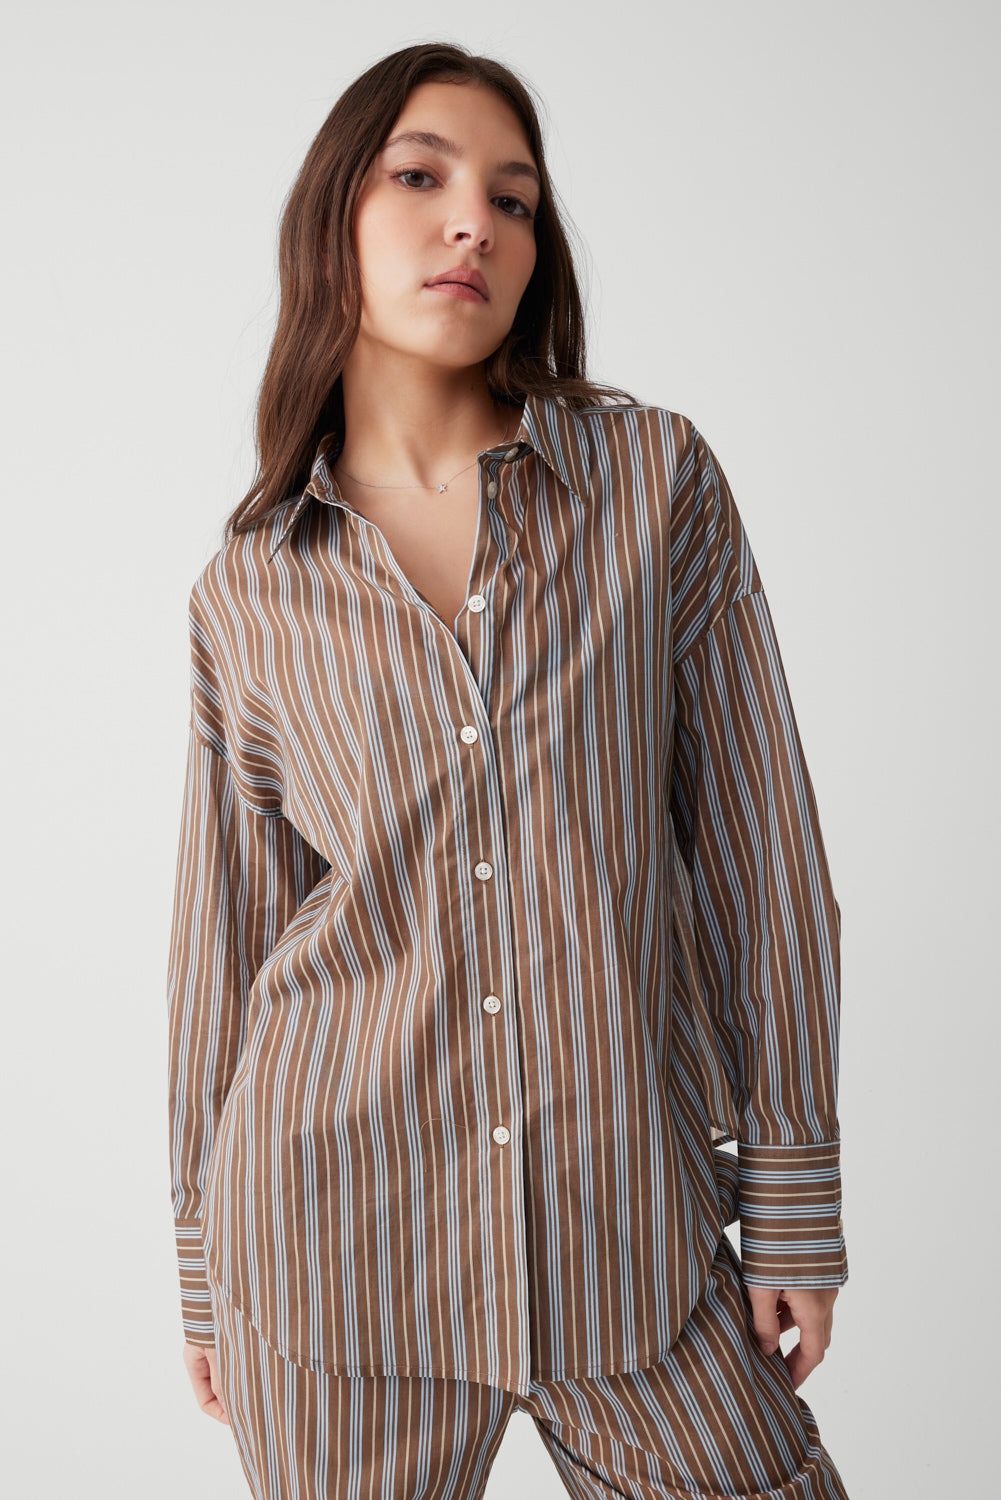 Griffin Striped Button Up Shirt - Ocean Stone